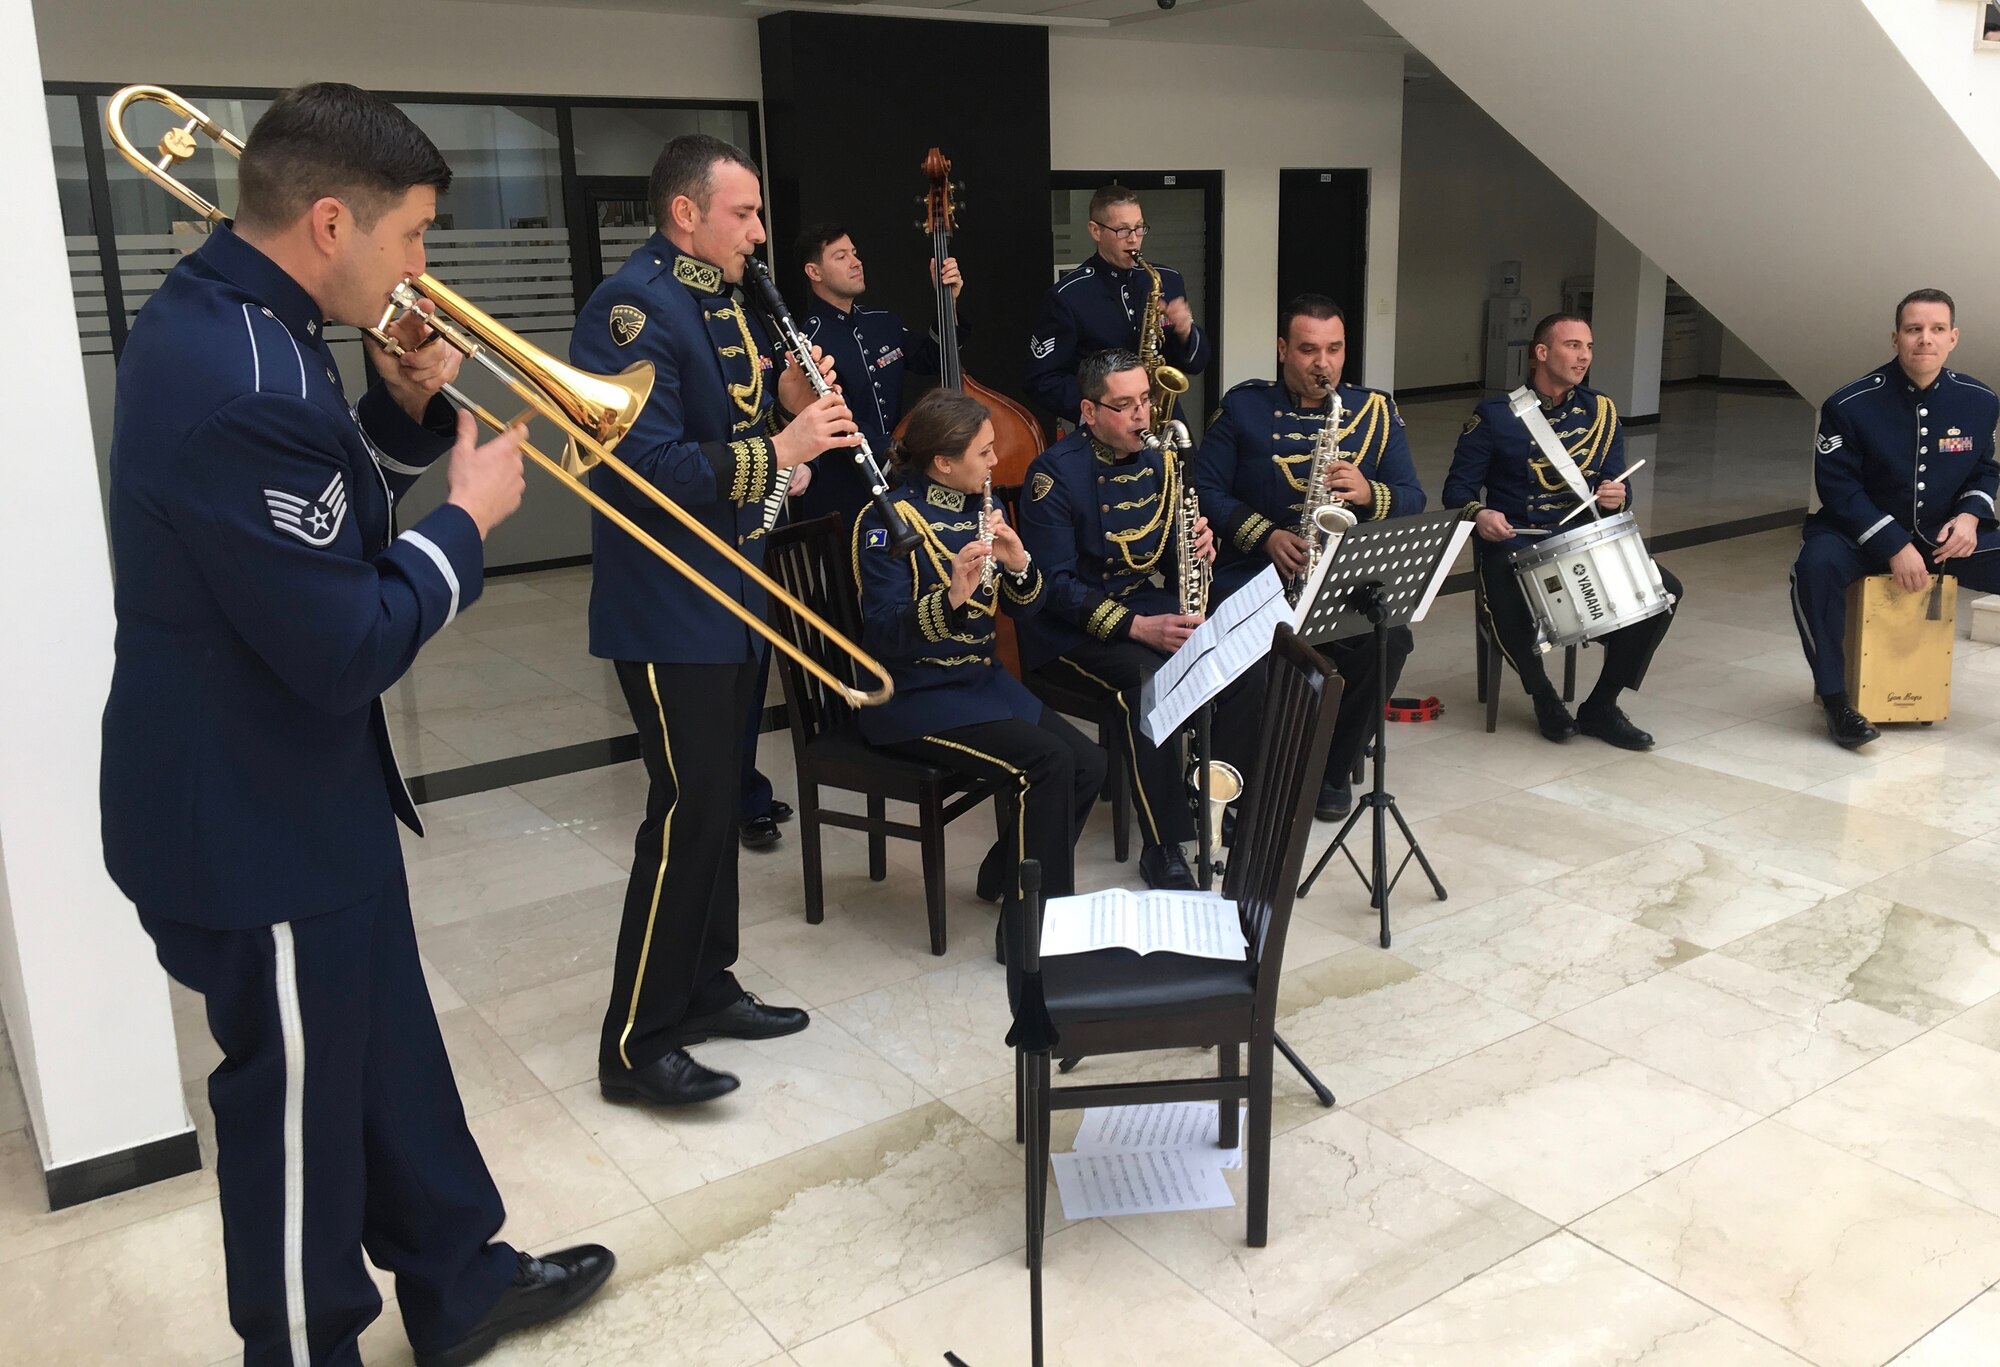 A seven-piece ensemble with the U.S. Air Forces in Europe Band performs alongside the Kosovo Security Forces Band at the KSF headquarters in Pristina, Kosovo, Feb. 14, 2018. The band was in Kosovo to celebrate the 10th anniversary of Kosovo independence. (U.S. Air Force photo by Maj. Tristan Hinderliter)